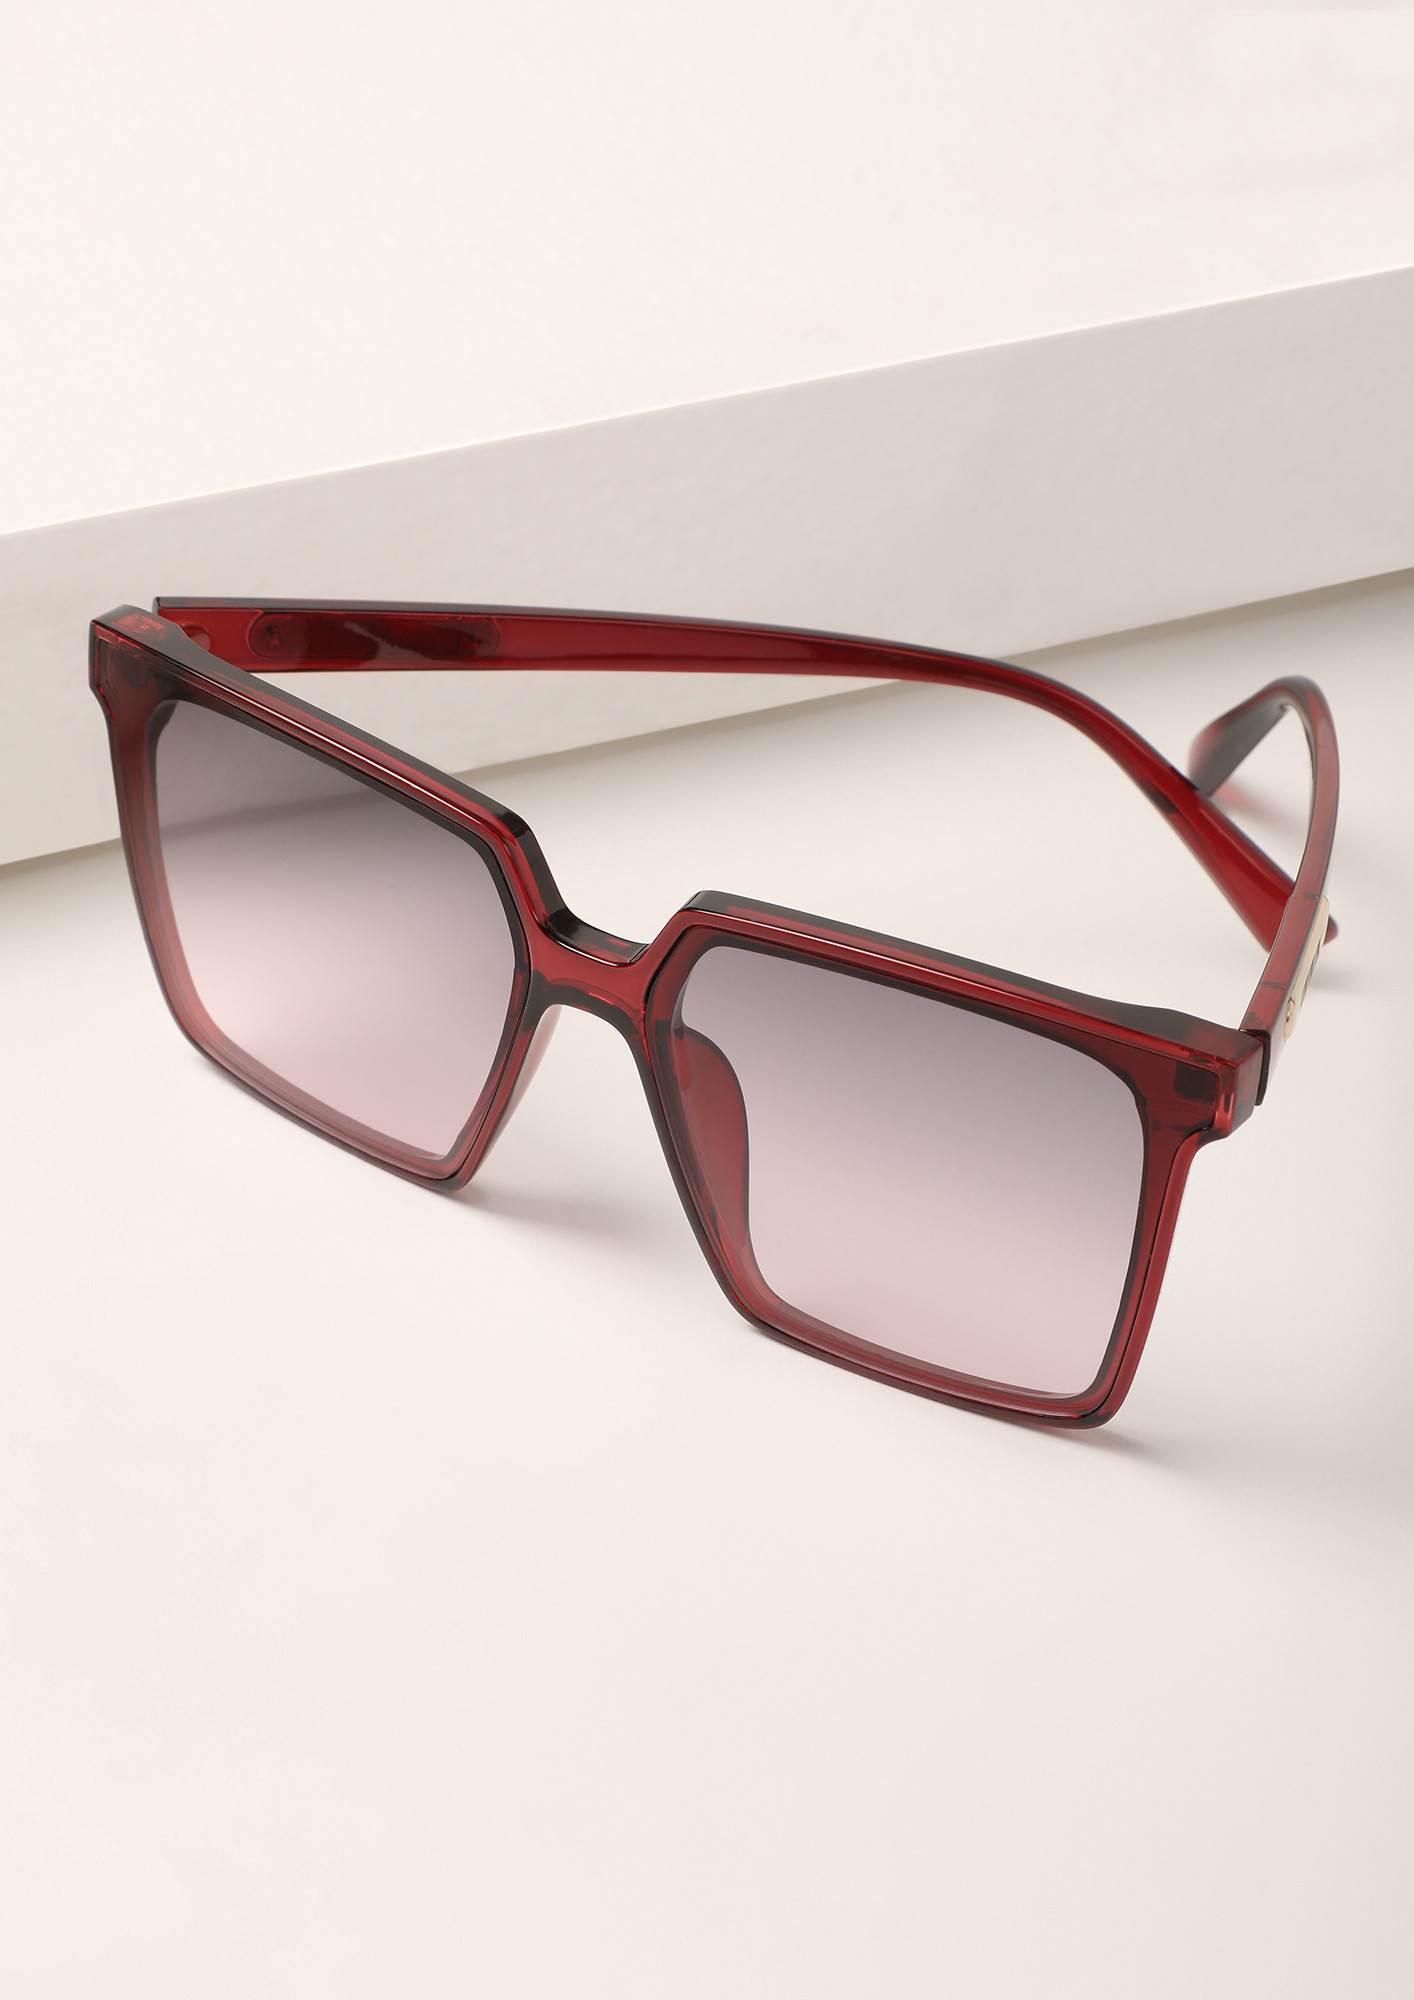 THE CLEAN AND CLASSY RED WAYFARERS